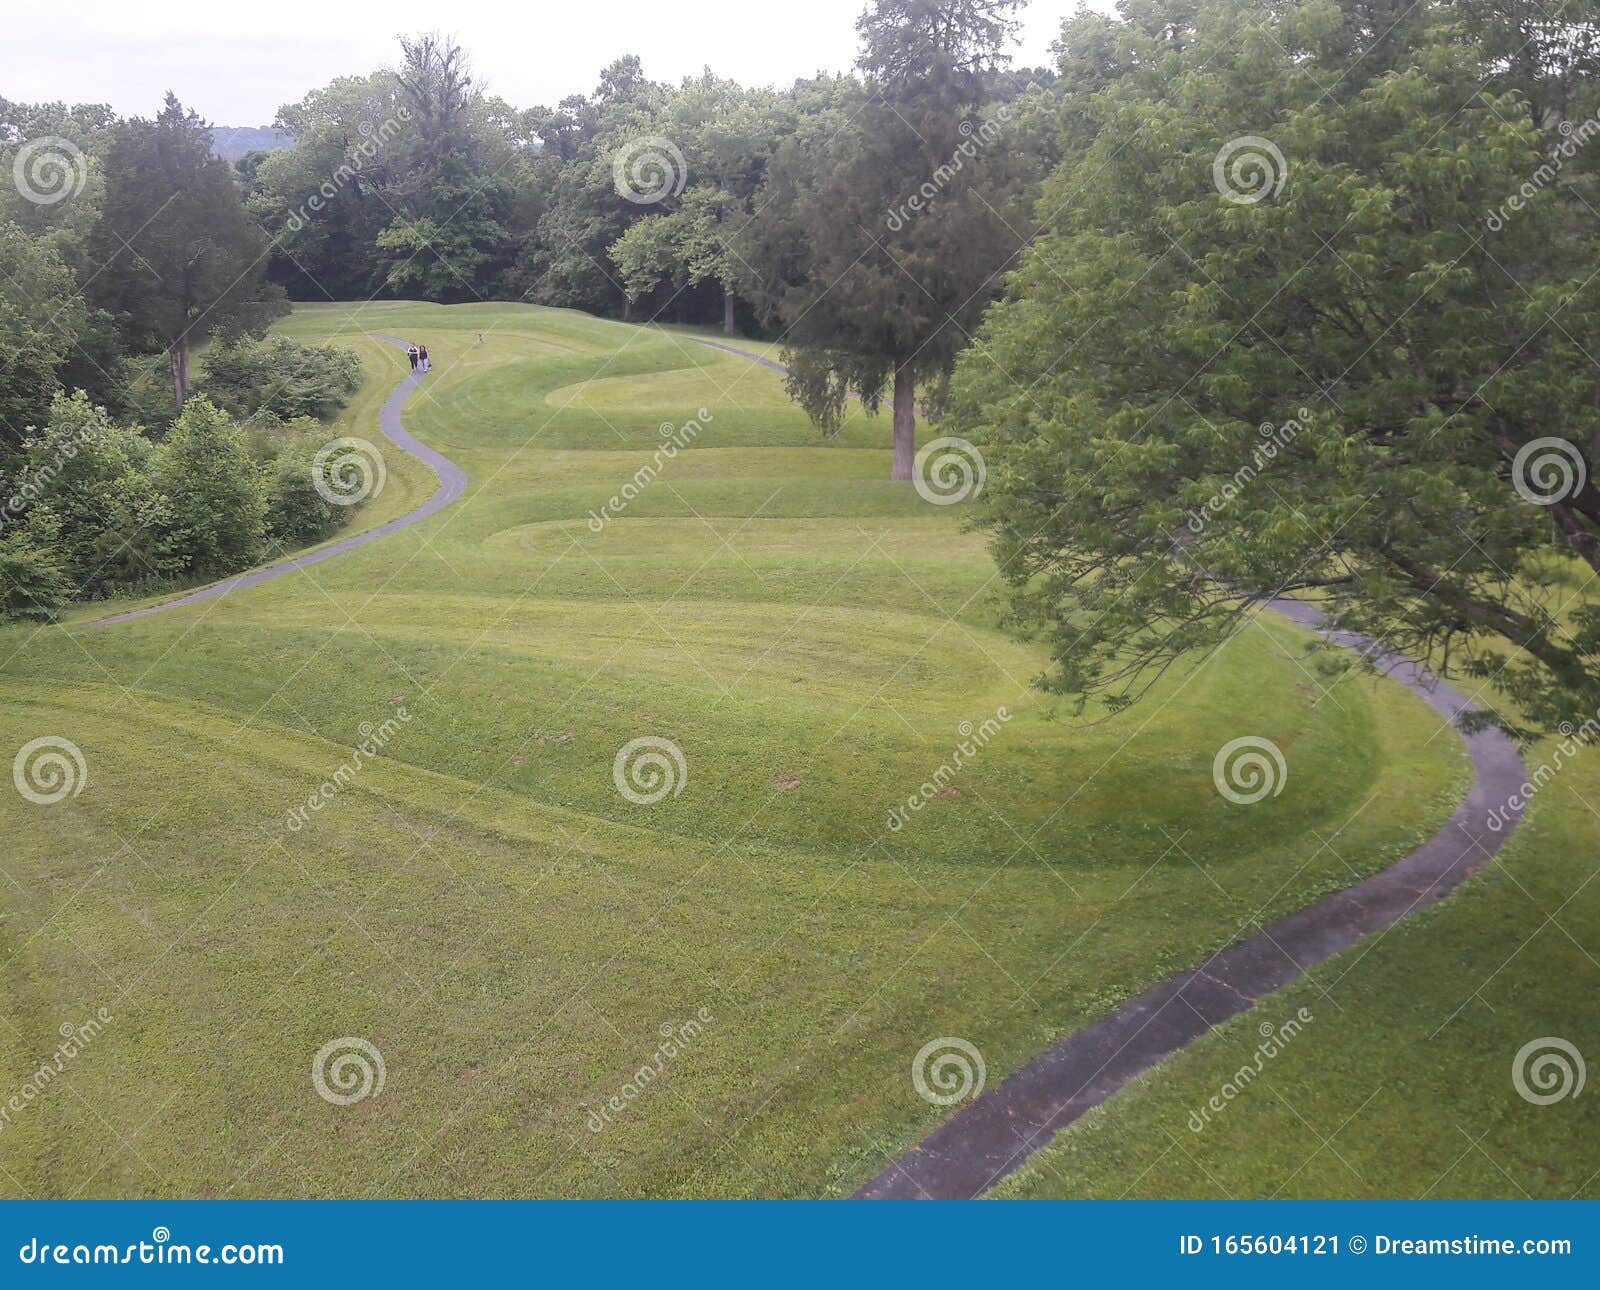 serpent mound ohio cloudy clear